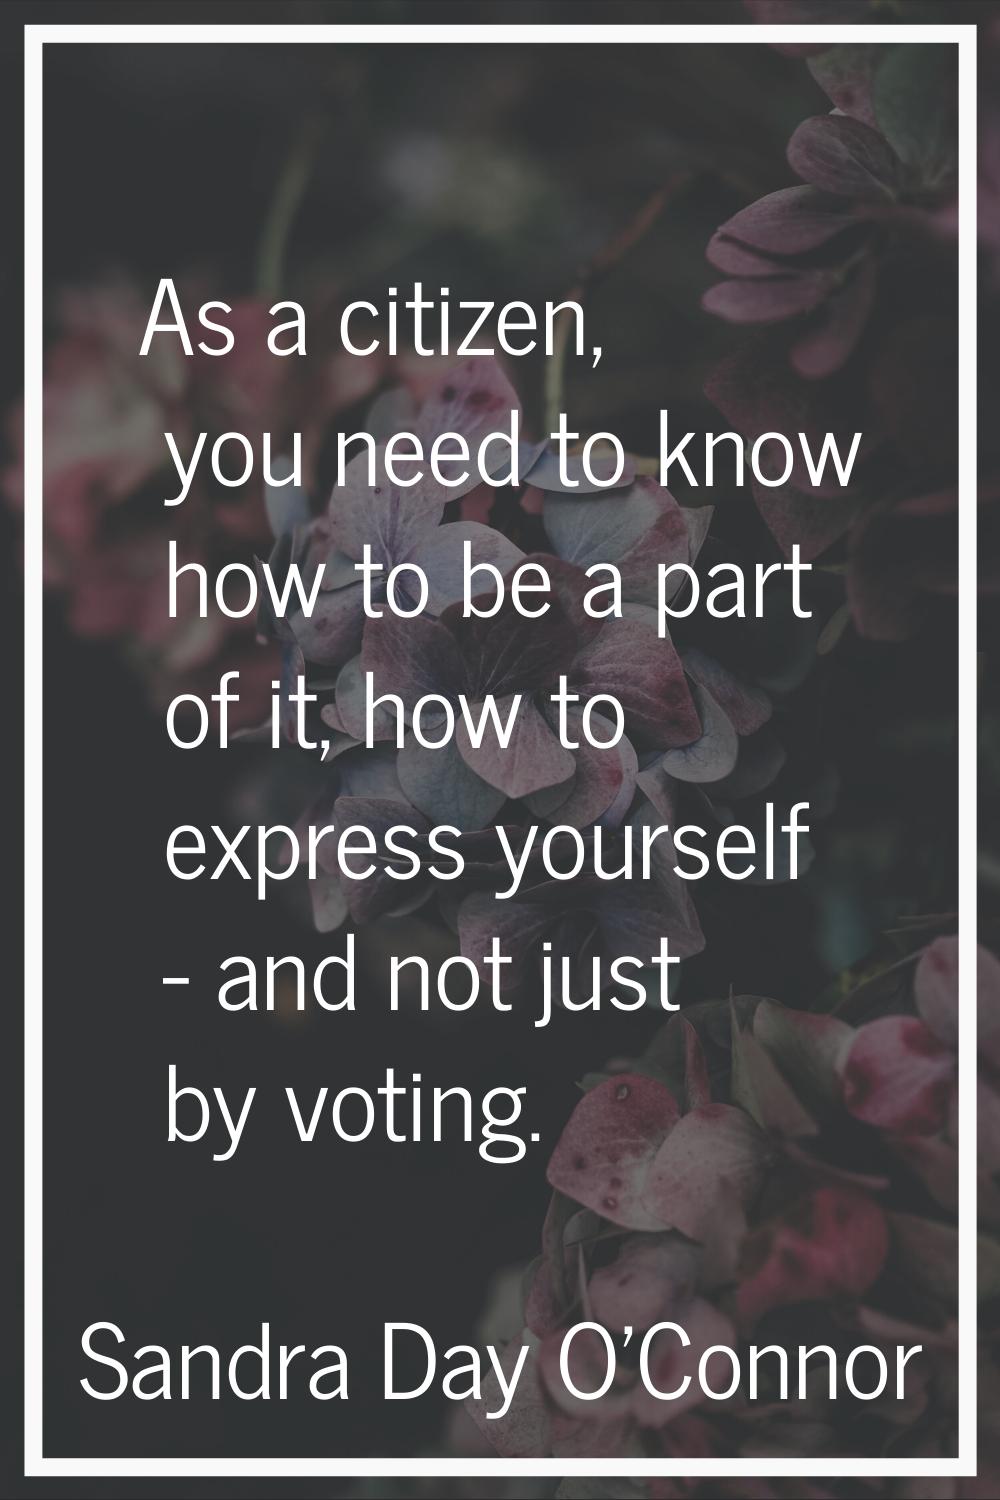 As a citizen, you need to know how to be a part of it, how to express yourself - and not just by vo